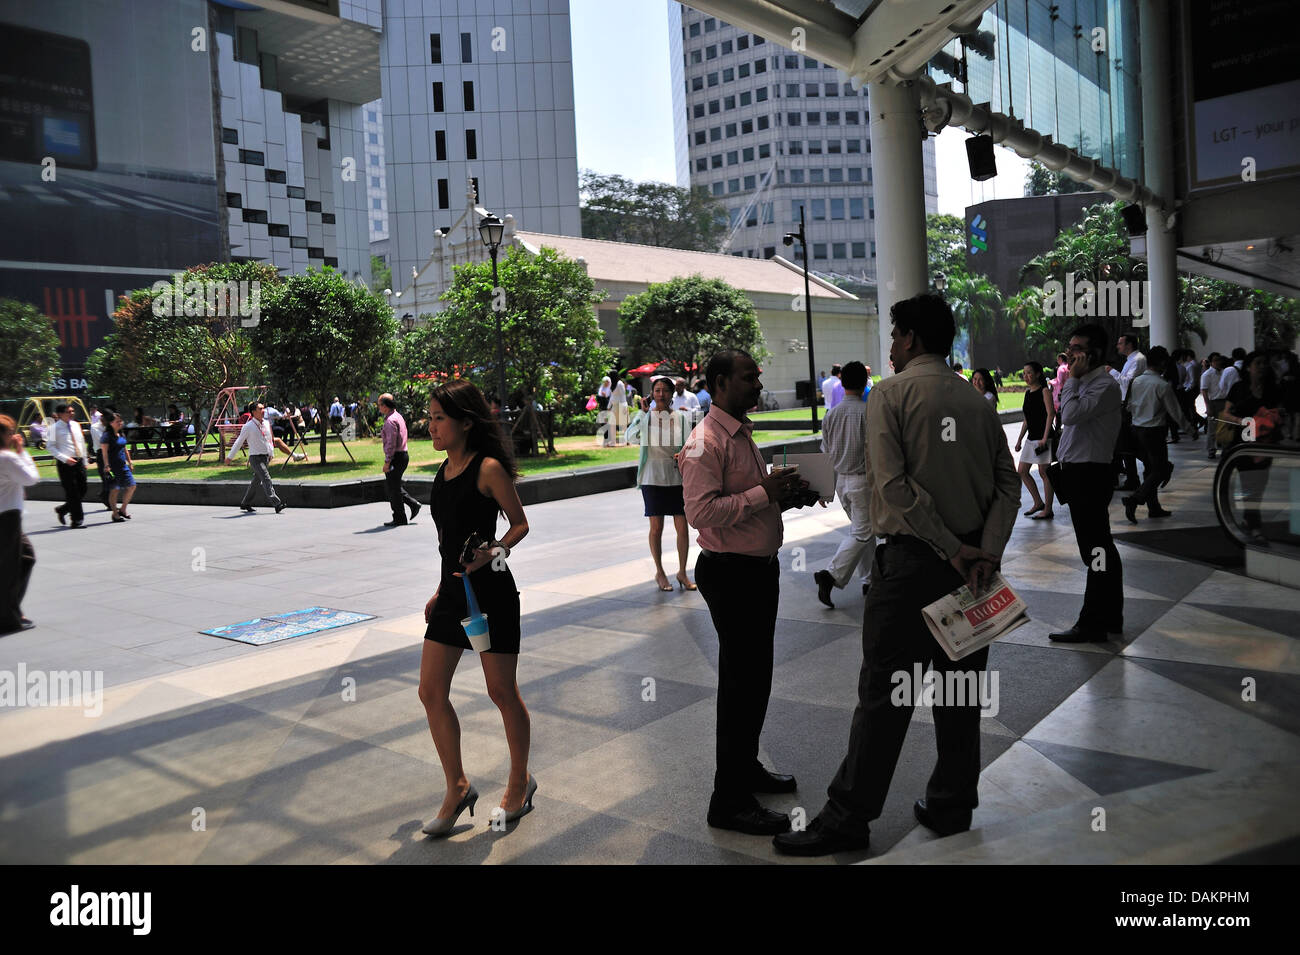 Mittagspause in Raffles Place Central Business District Singapur Stockfoto